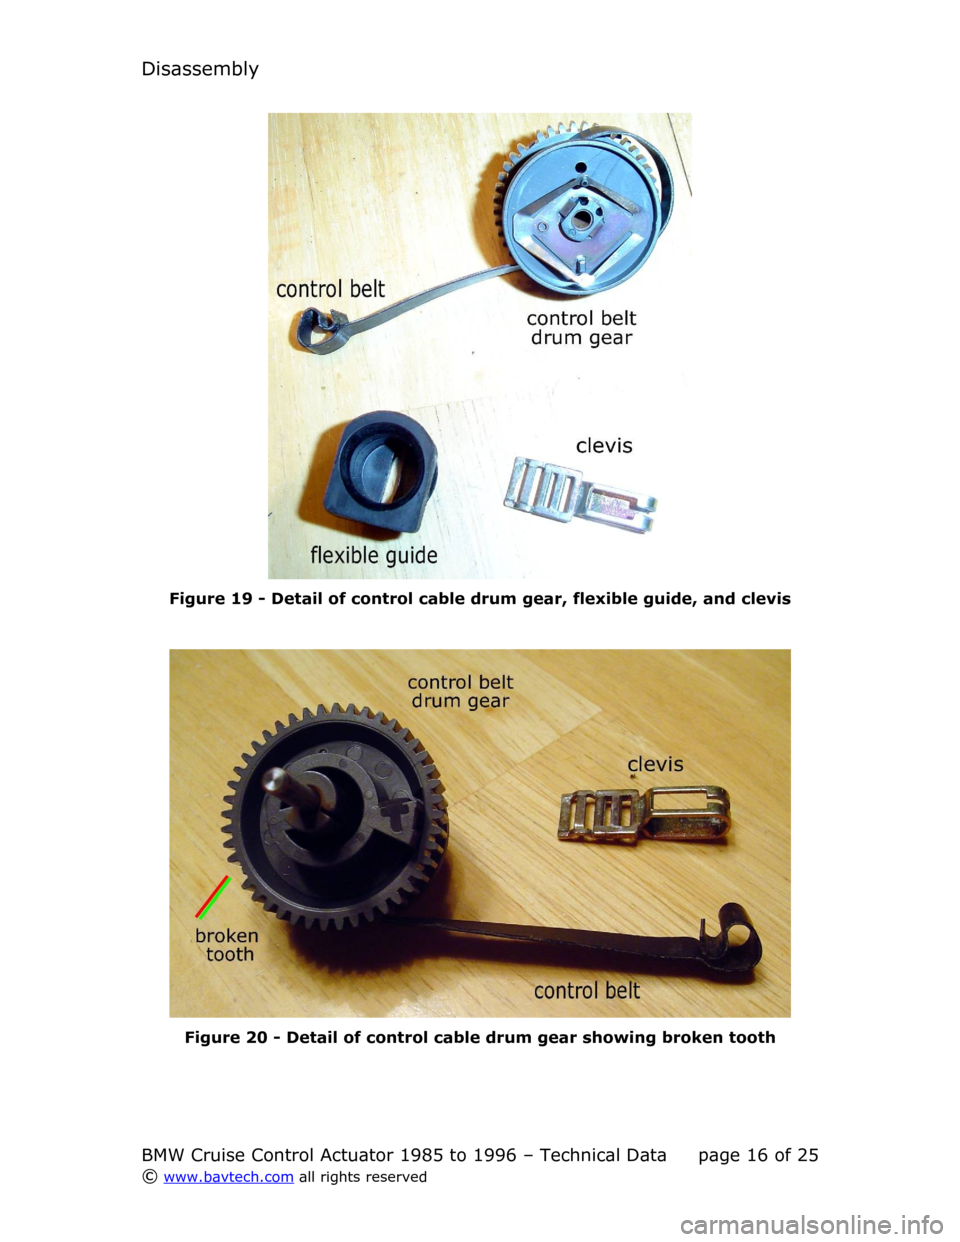 BMW 3 SERIES 1995 E36 Cruise Control Acutator Disassembly
Figure  19  - Detail of control cable drum gear, flexible guide, and clevis
Figure  20  - Detail of control cable drum gear showing broken tooth
BMW Cruise Control Actuator 1985 to 1996 �